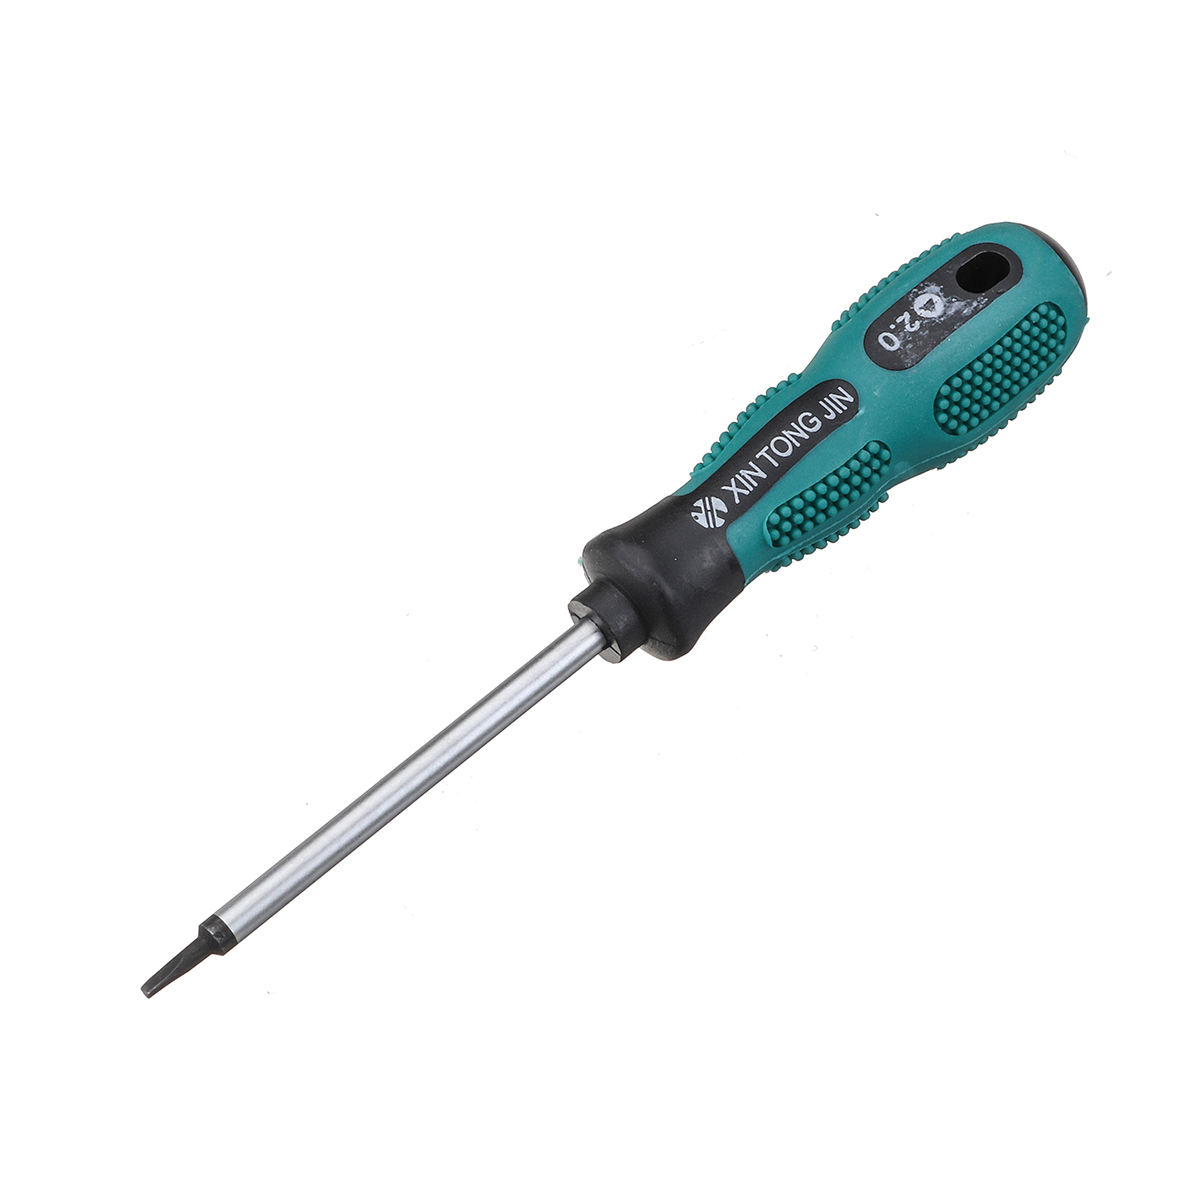 Portable-Insulated-Screwdriver-Magnetic-Bits-Watches-Toys-Repair-Tool-1553444-5